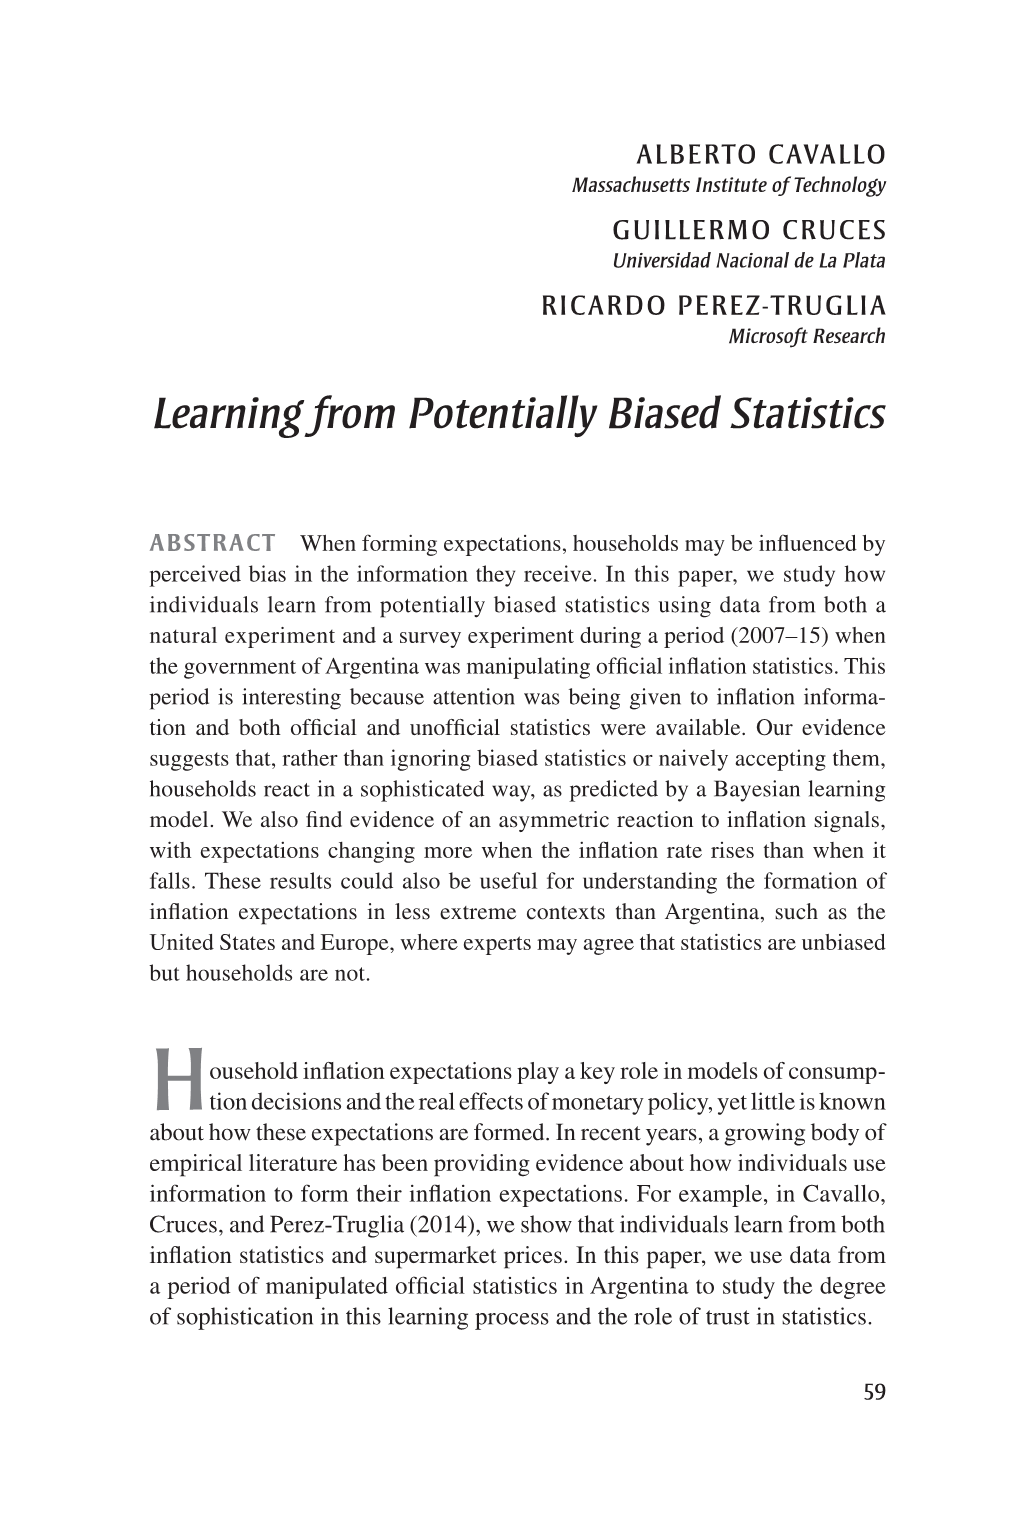 Learning from Potentially Biased Statistics